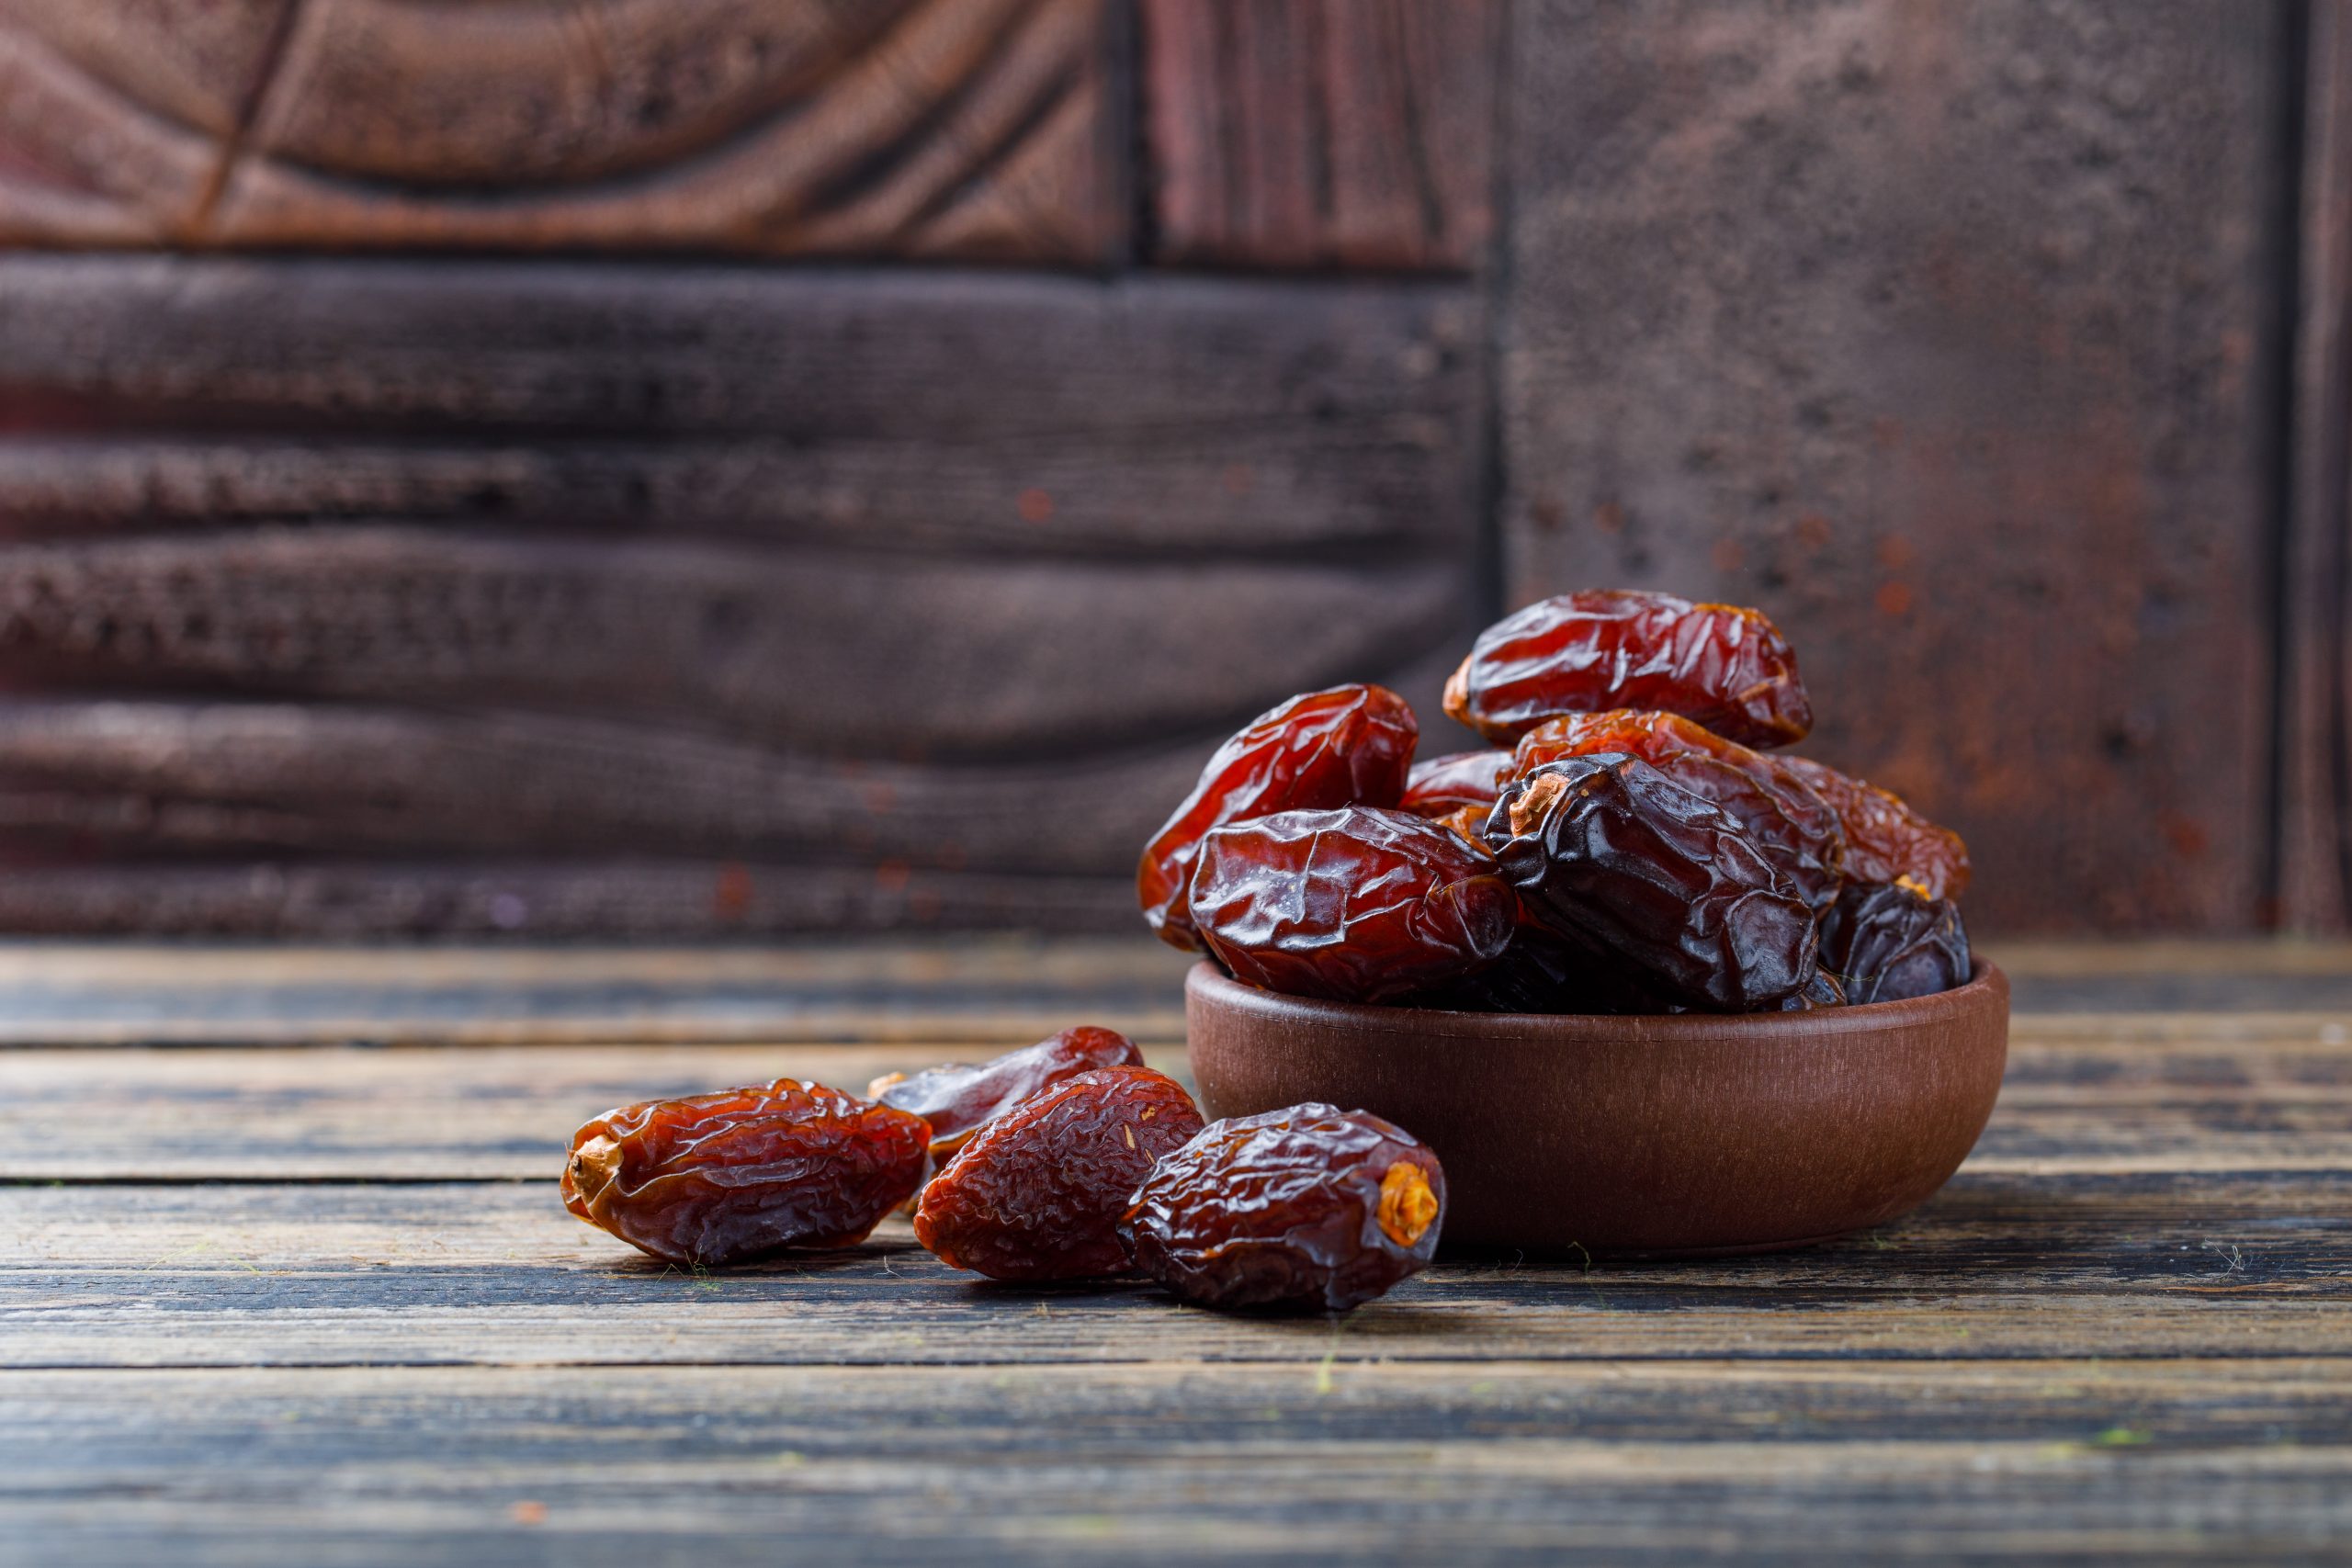 Sweet dates in a clay plate on stone tile and wooden background, side view.